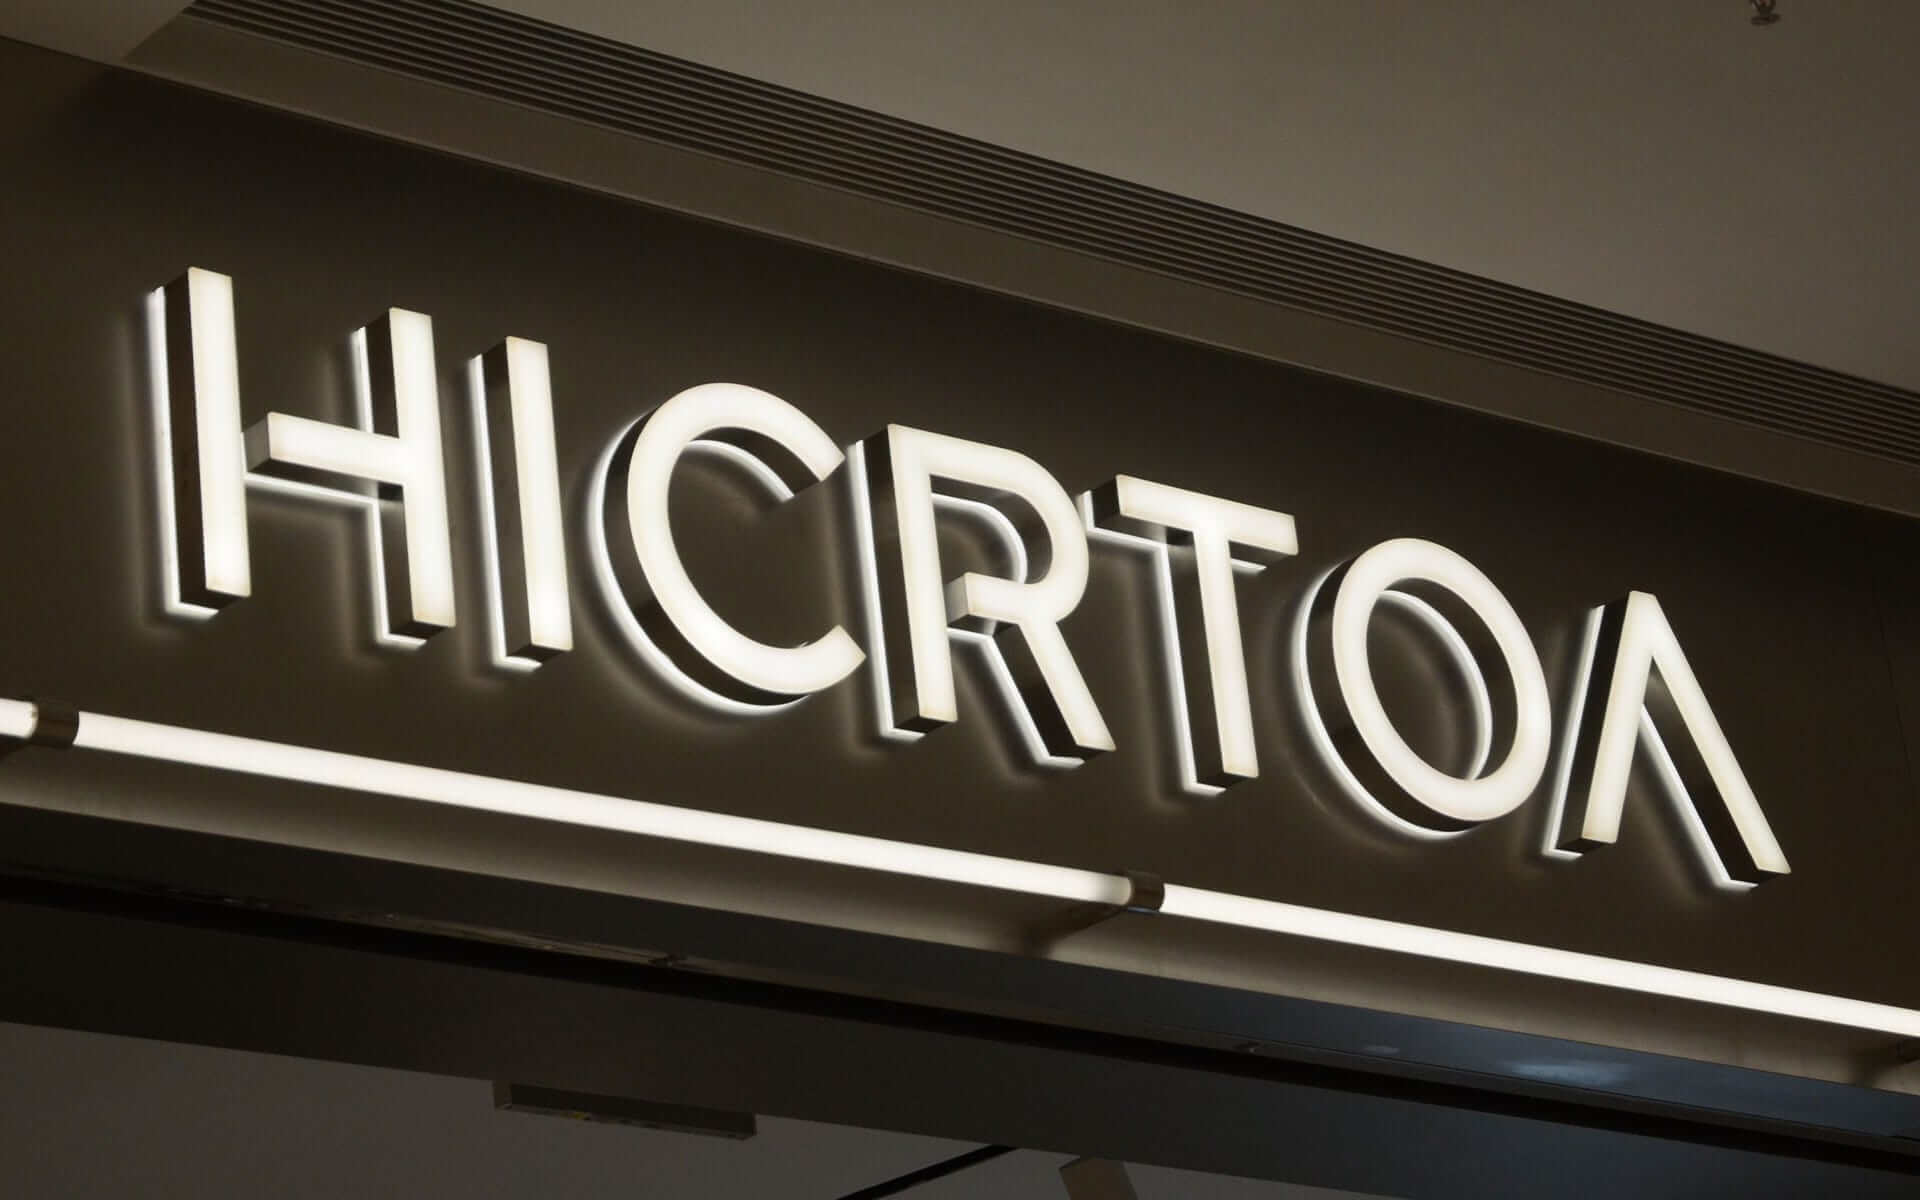 Face and Back-lit Metal Channel Letters for Hicrtoa